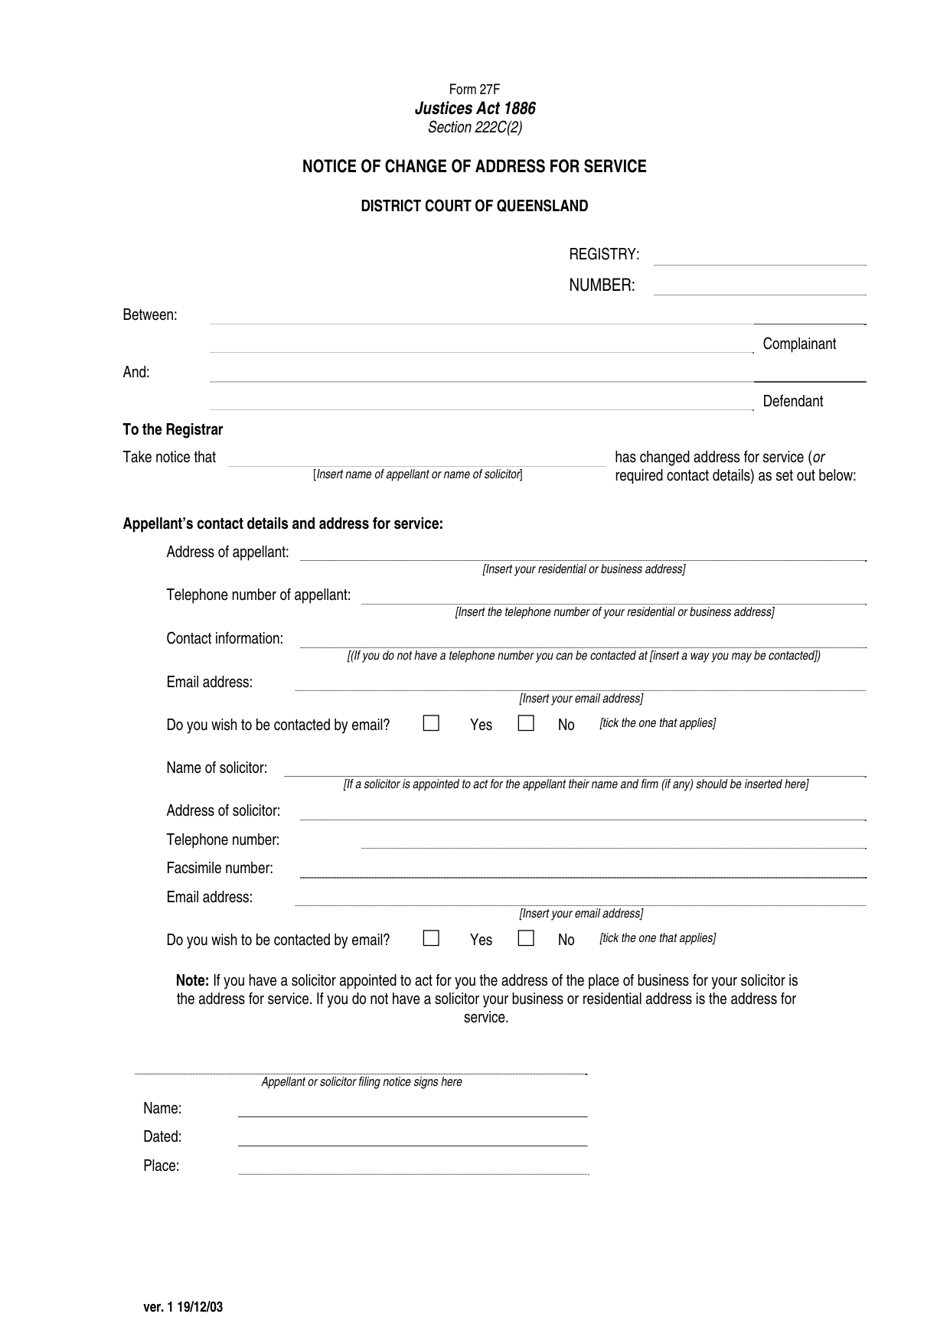 Form 27F Notice of Change of Address for Service - Queensland, Australia, Page 1